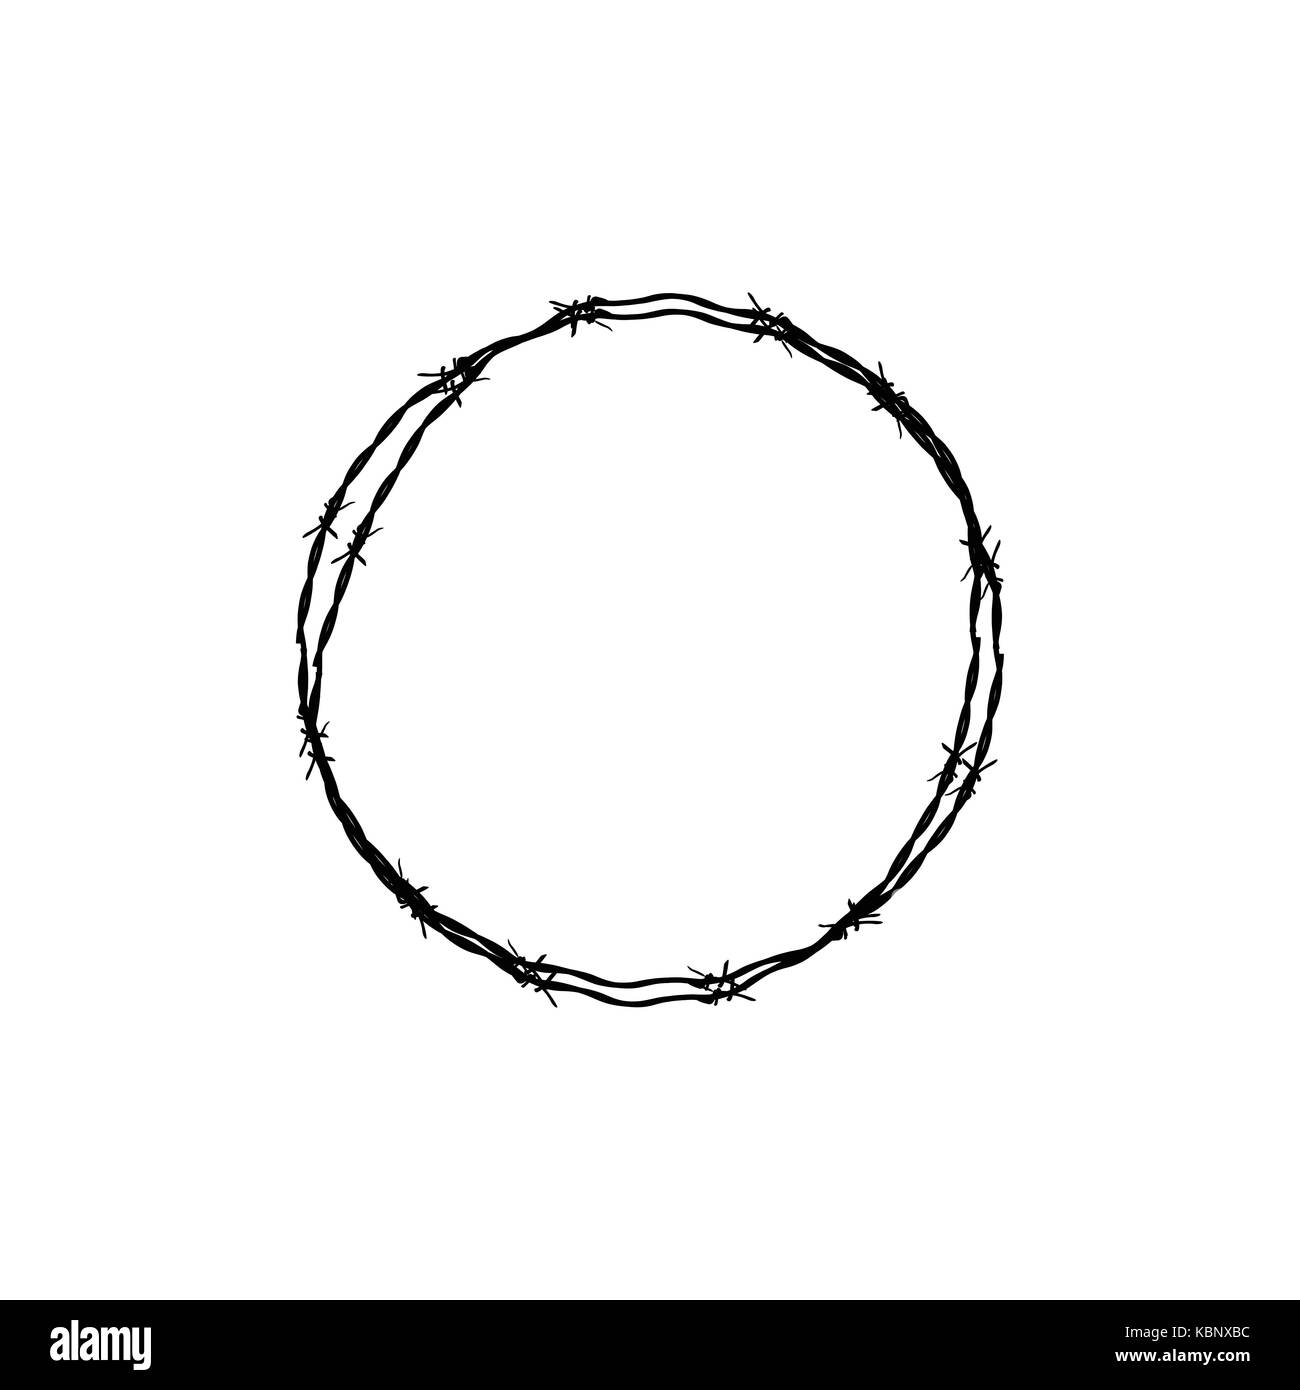 Vector illustration barbed wire circle isolated on white background Stock Vector